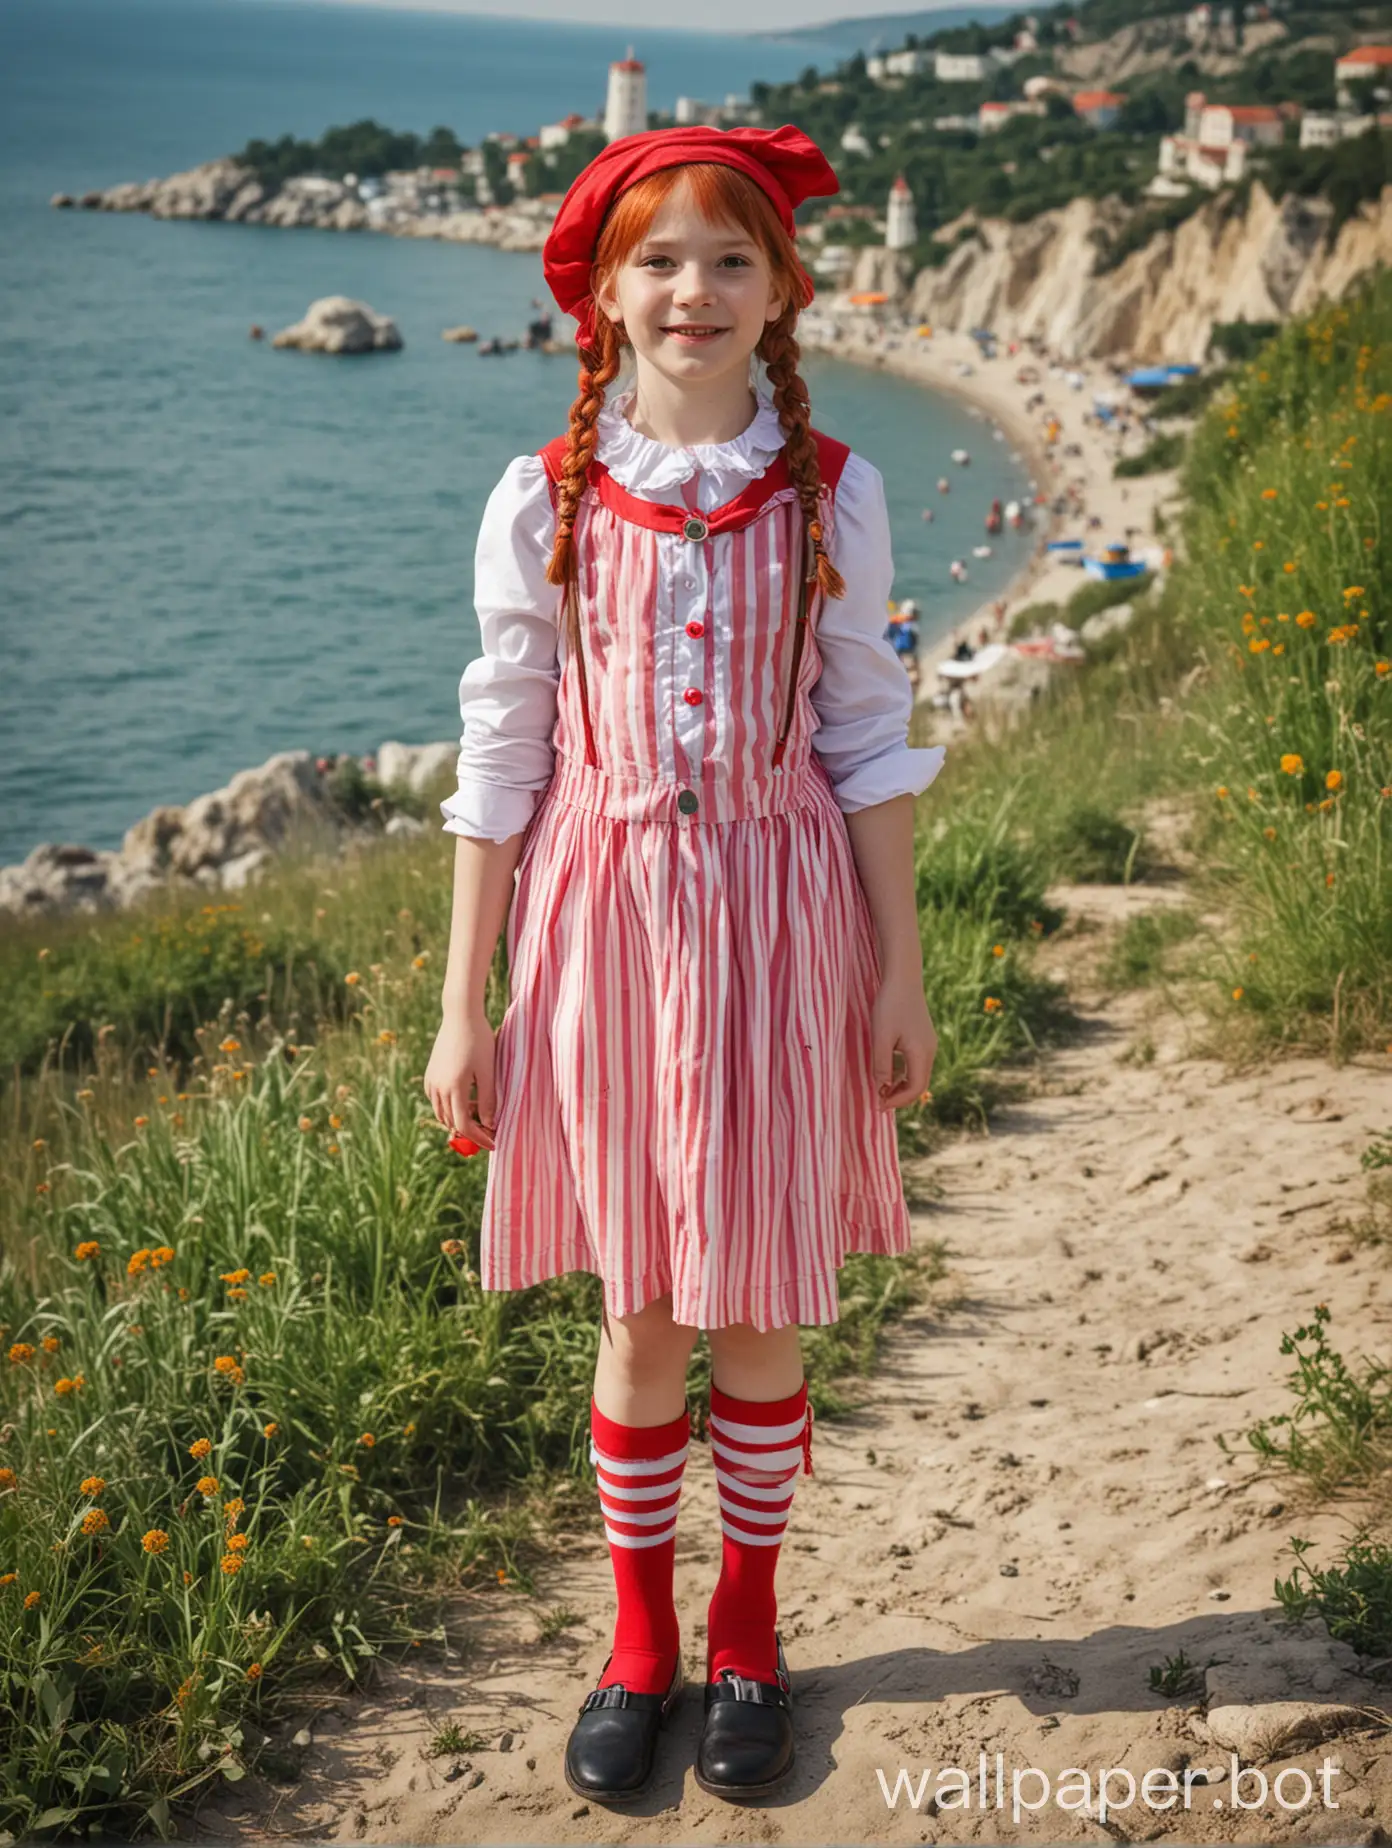 Pippi-Longstocking-Cosplay-by-10YearOld-Girl-with-Scenic-Crimea-Sea-View